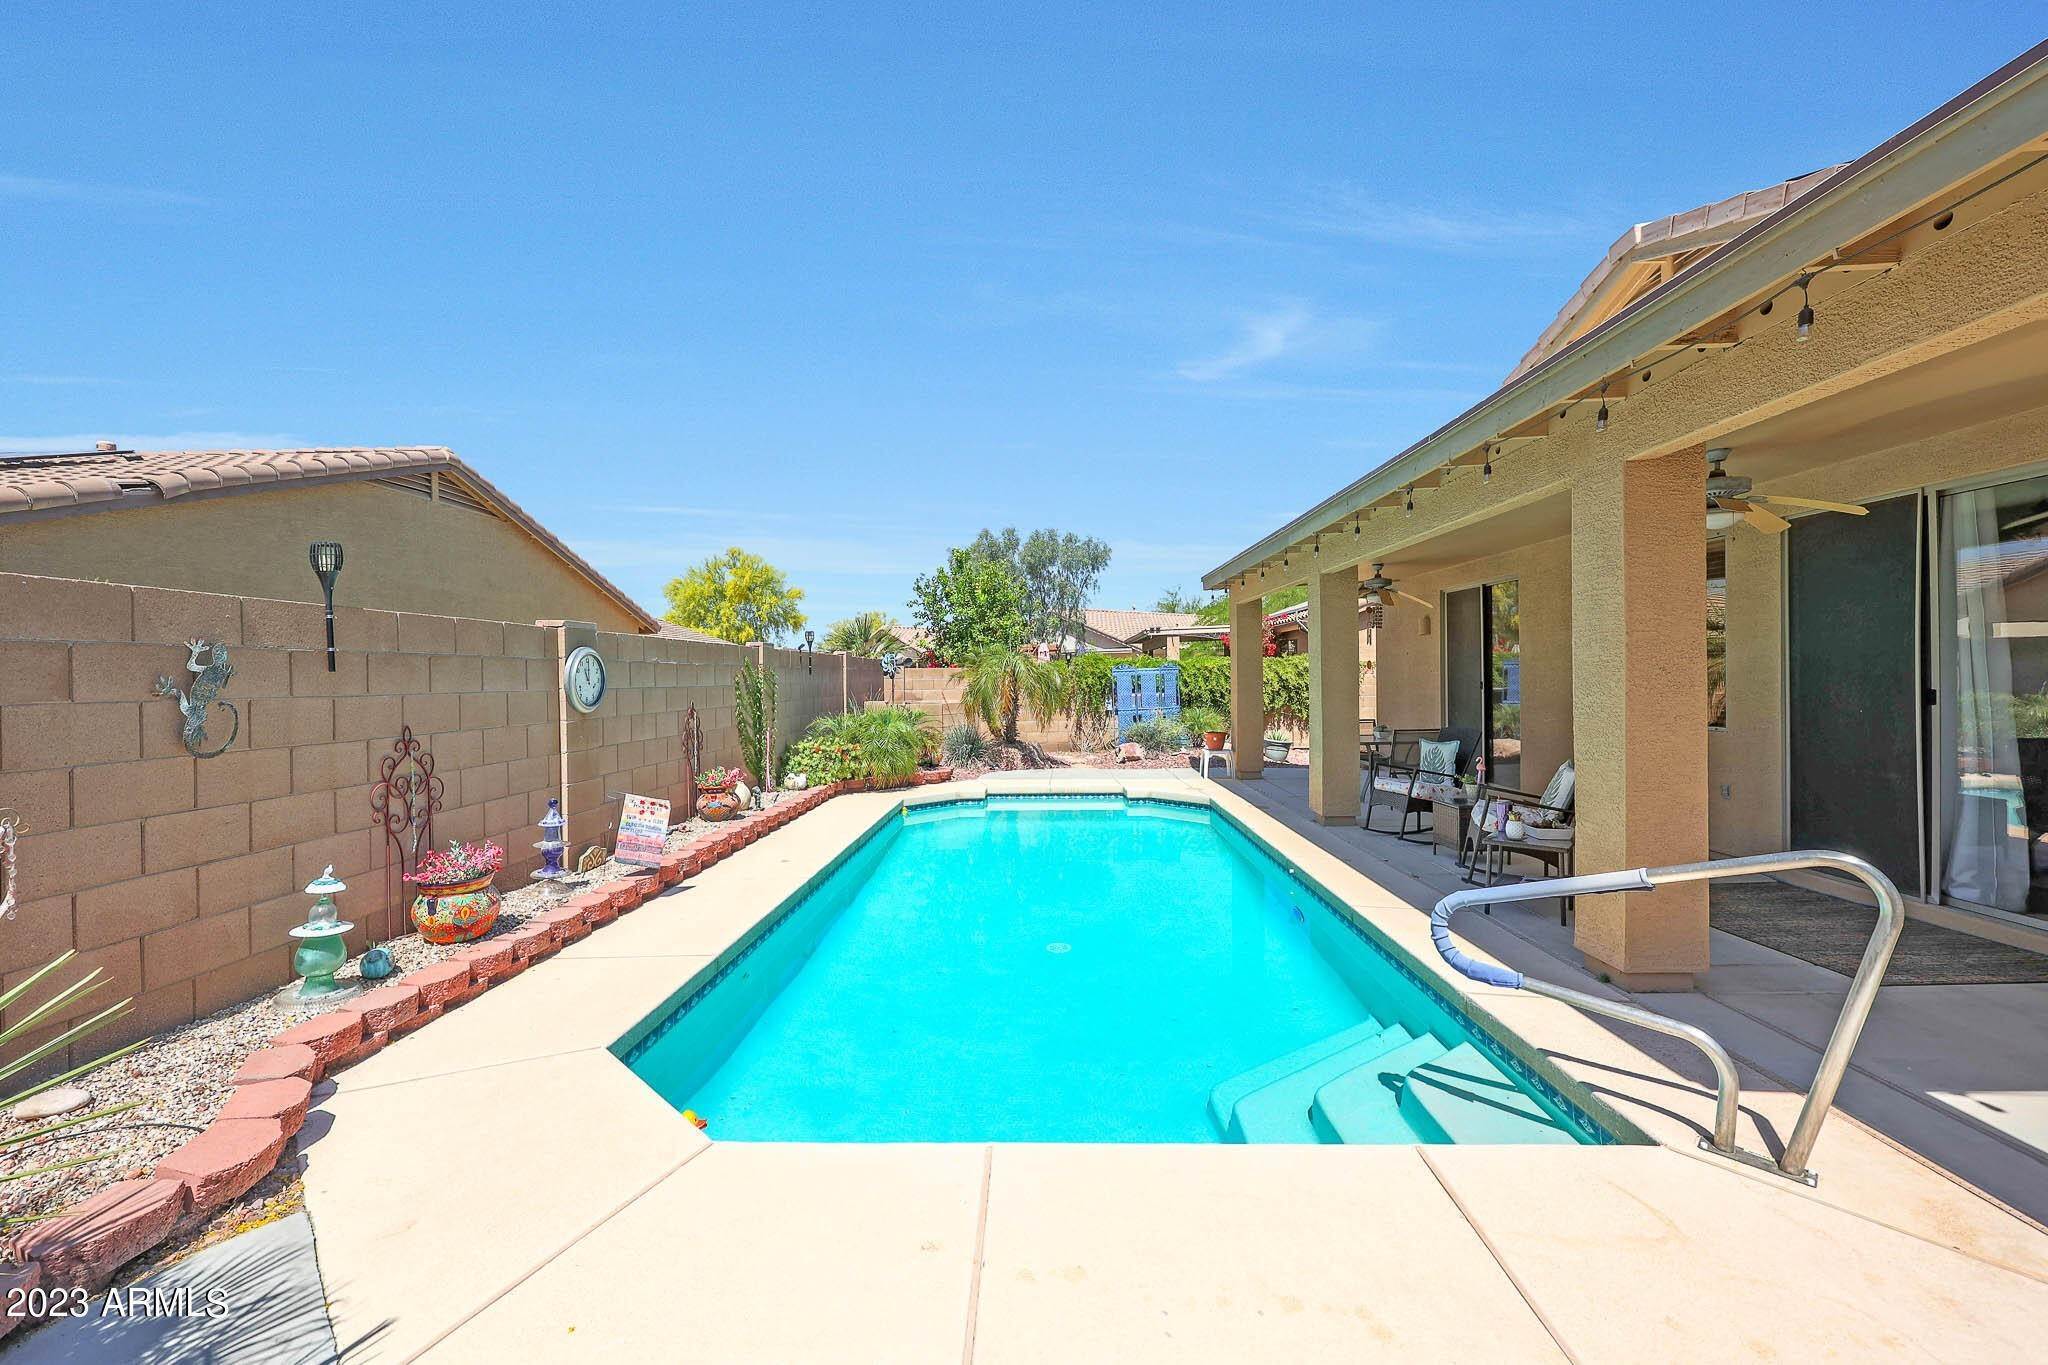 32. Single Family for Sale at Goodyear, AZ 85338